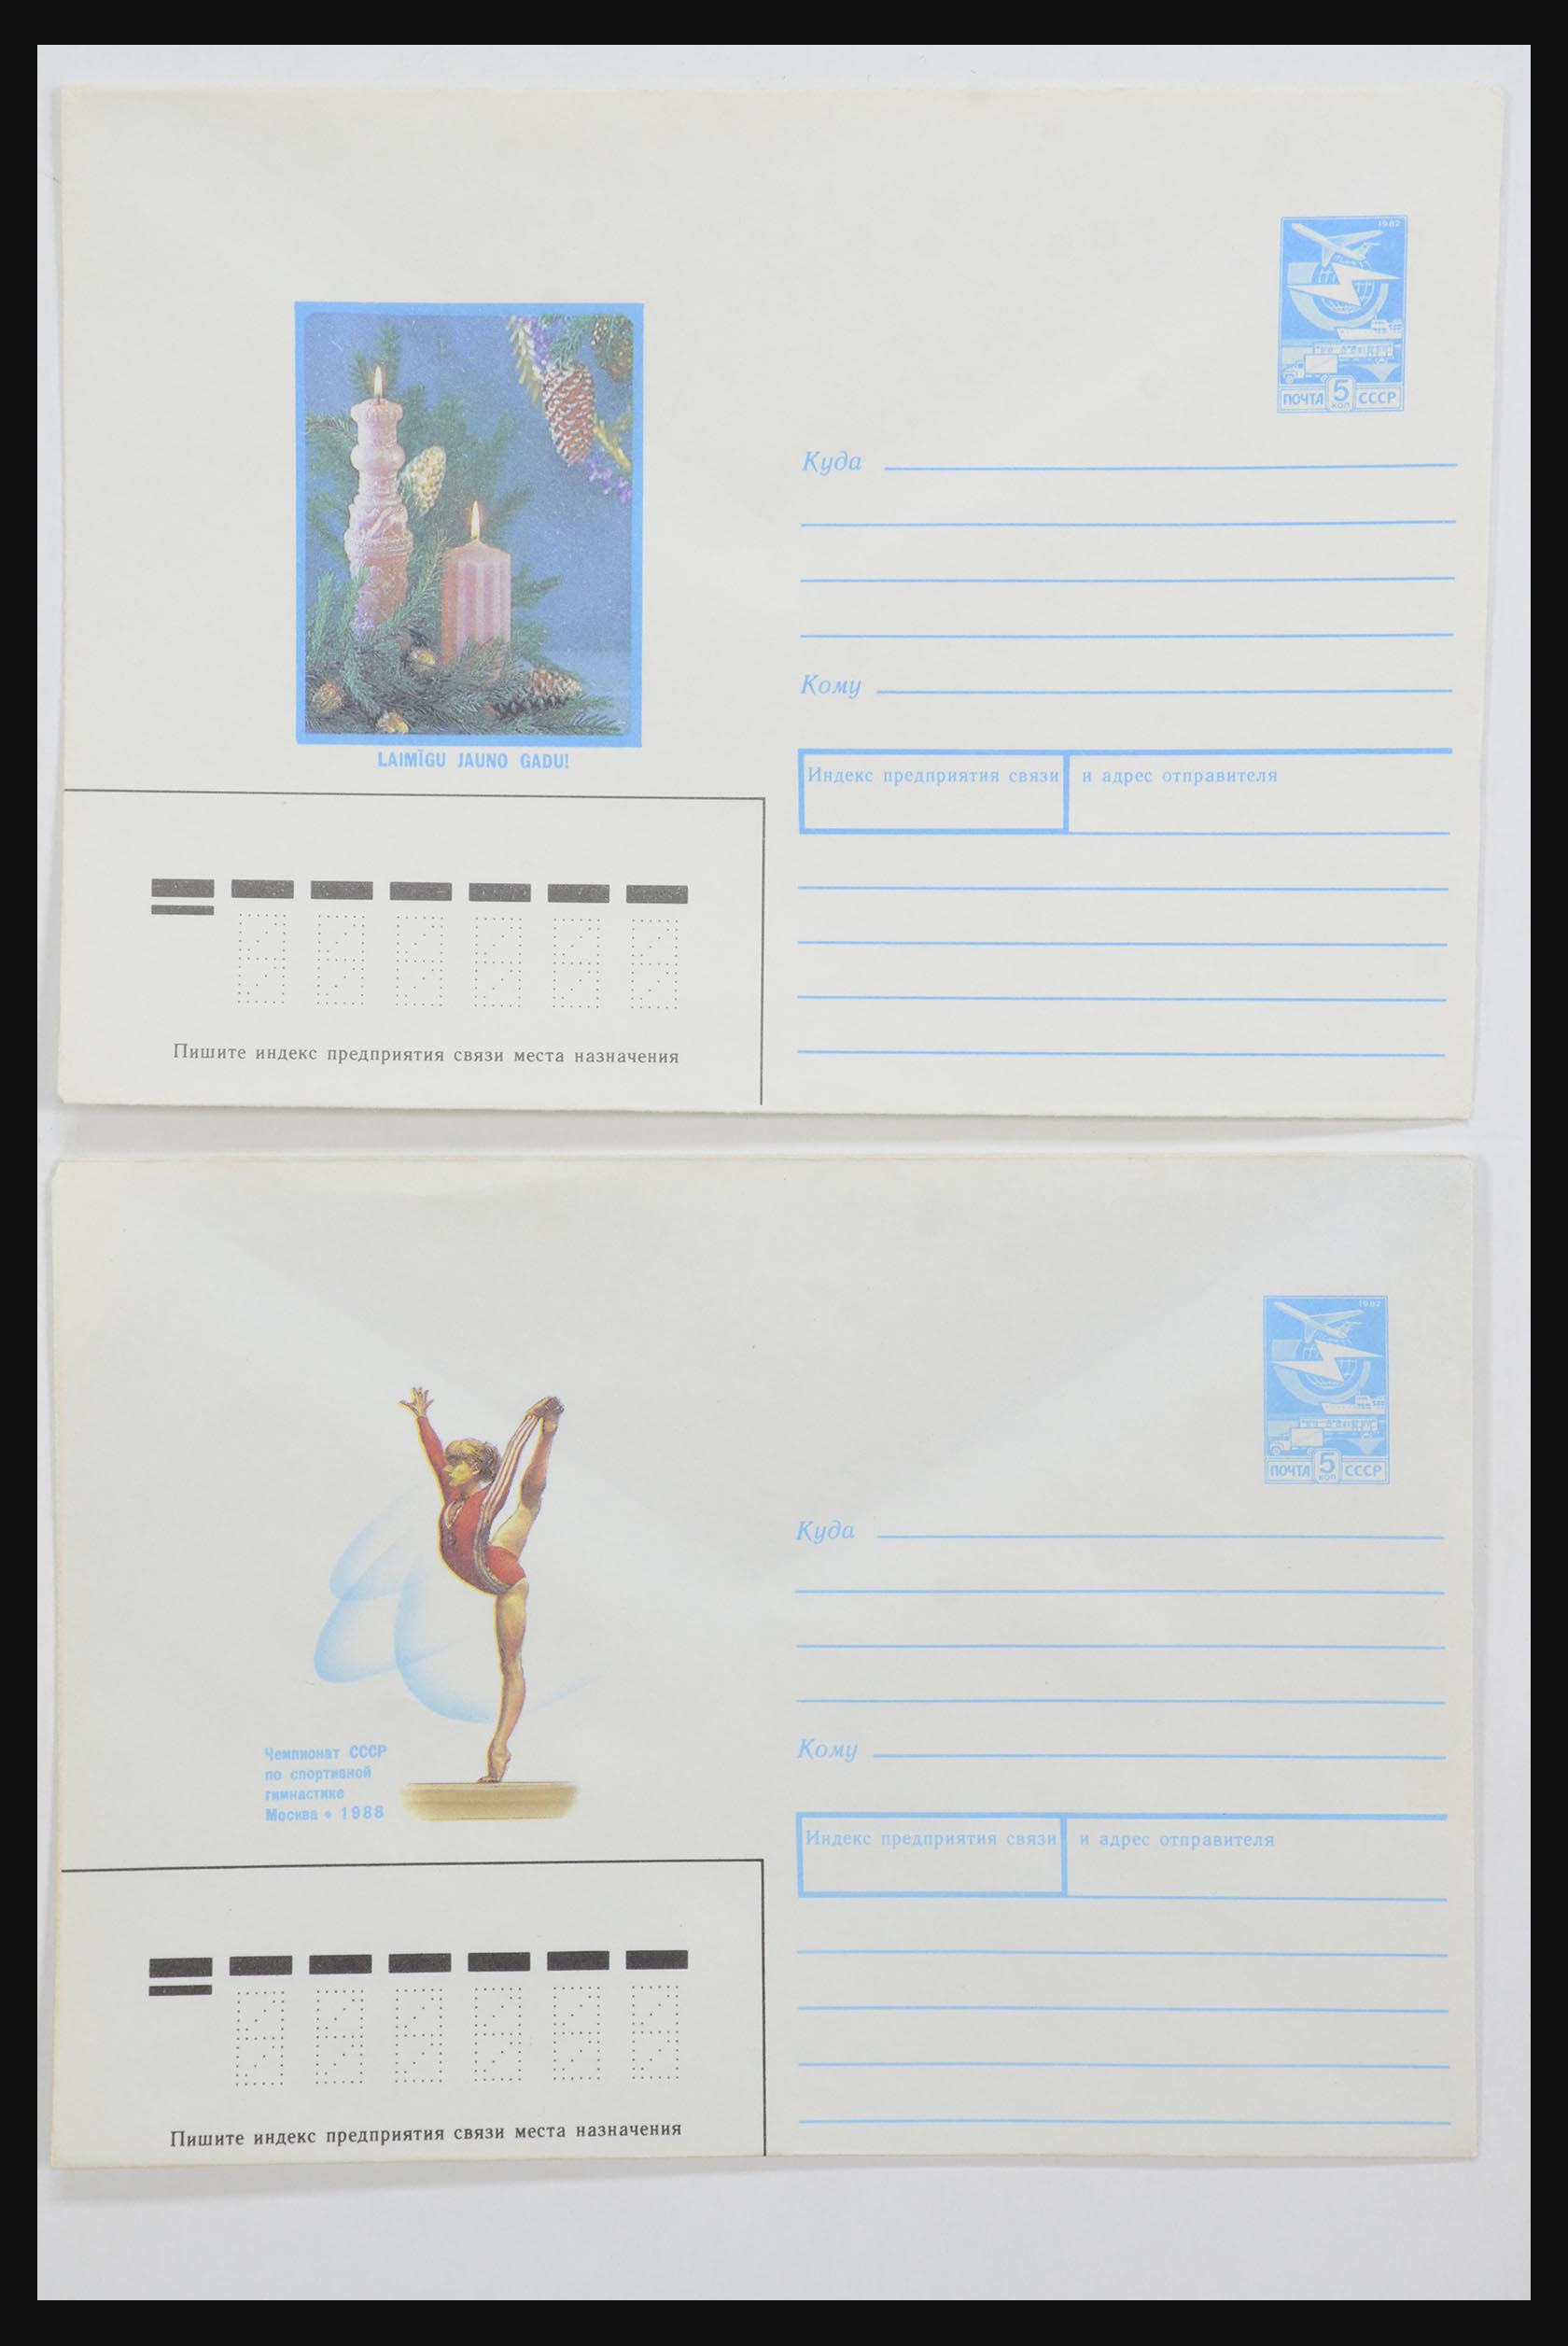 31928 0006 - 31928 Eastern Europe covers 1960's-1990's.